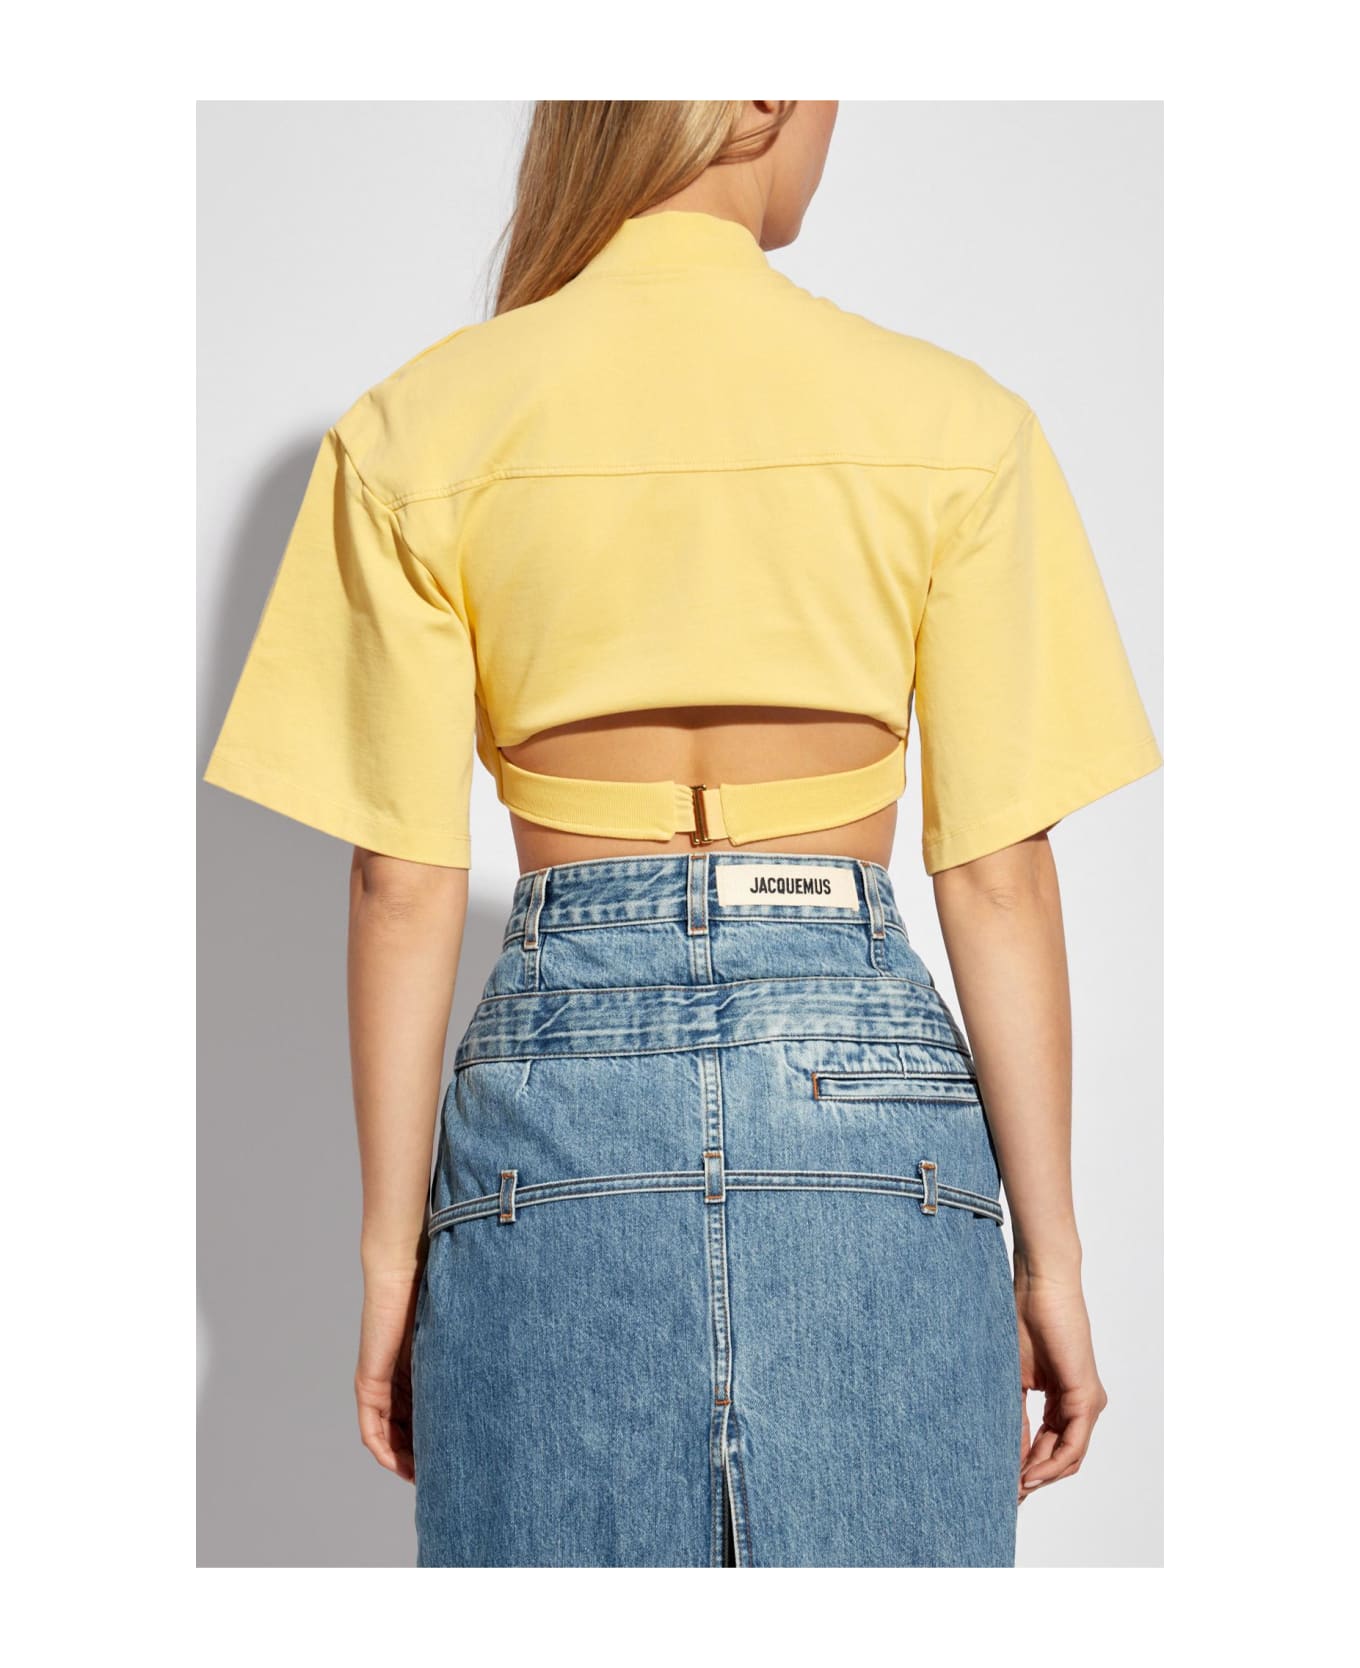 Jacquemus Cropped Top - YELLOW